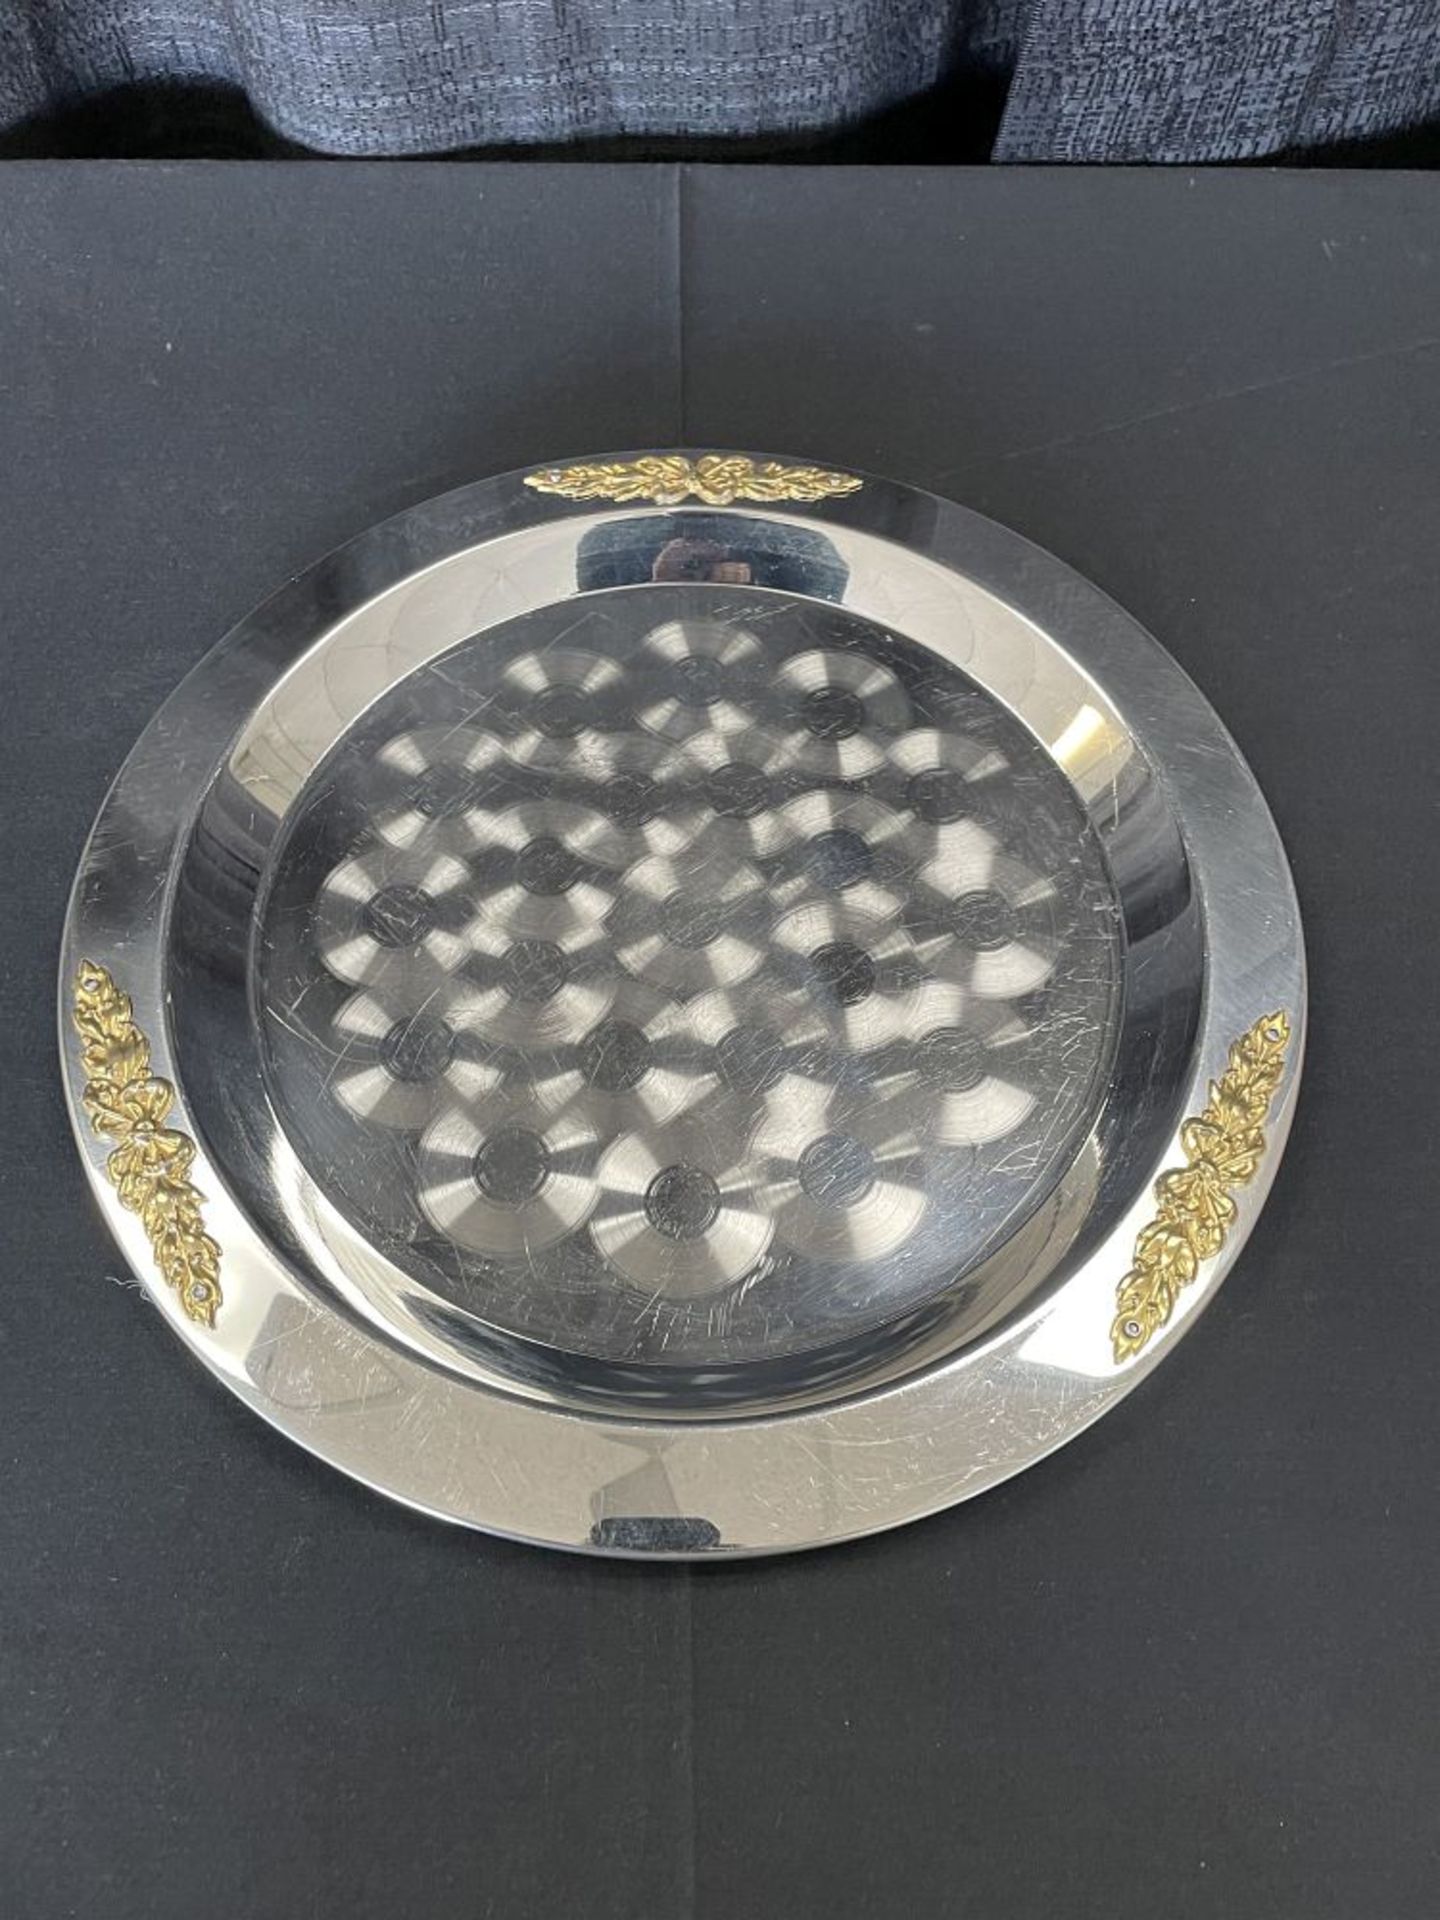 Serving Tray Set, Stainless w/ Gold Accent, 17.5", 15", 10" - Image 2 of 5